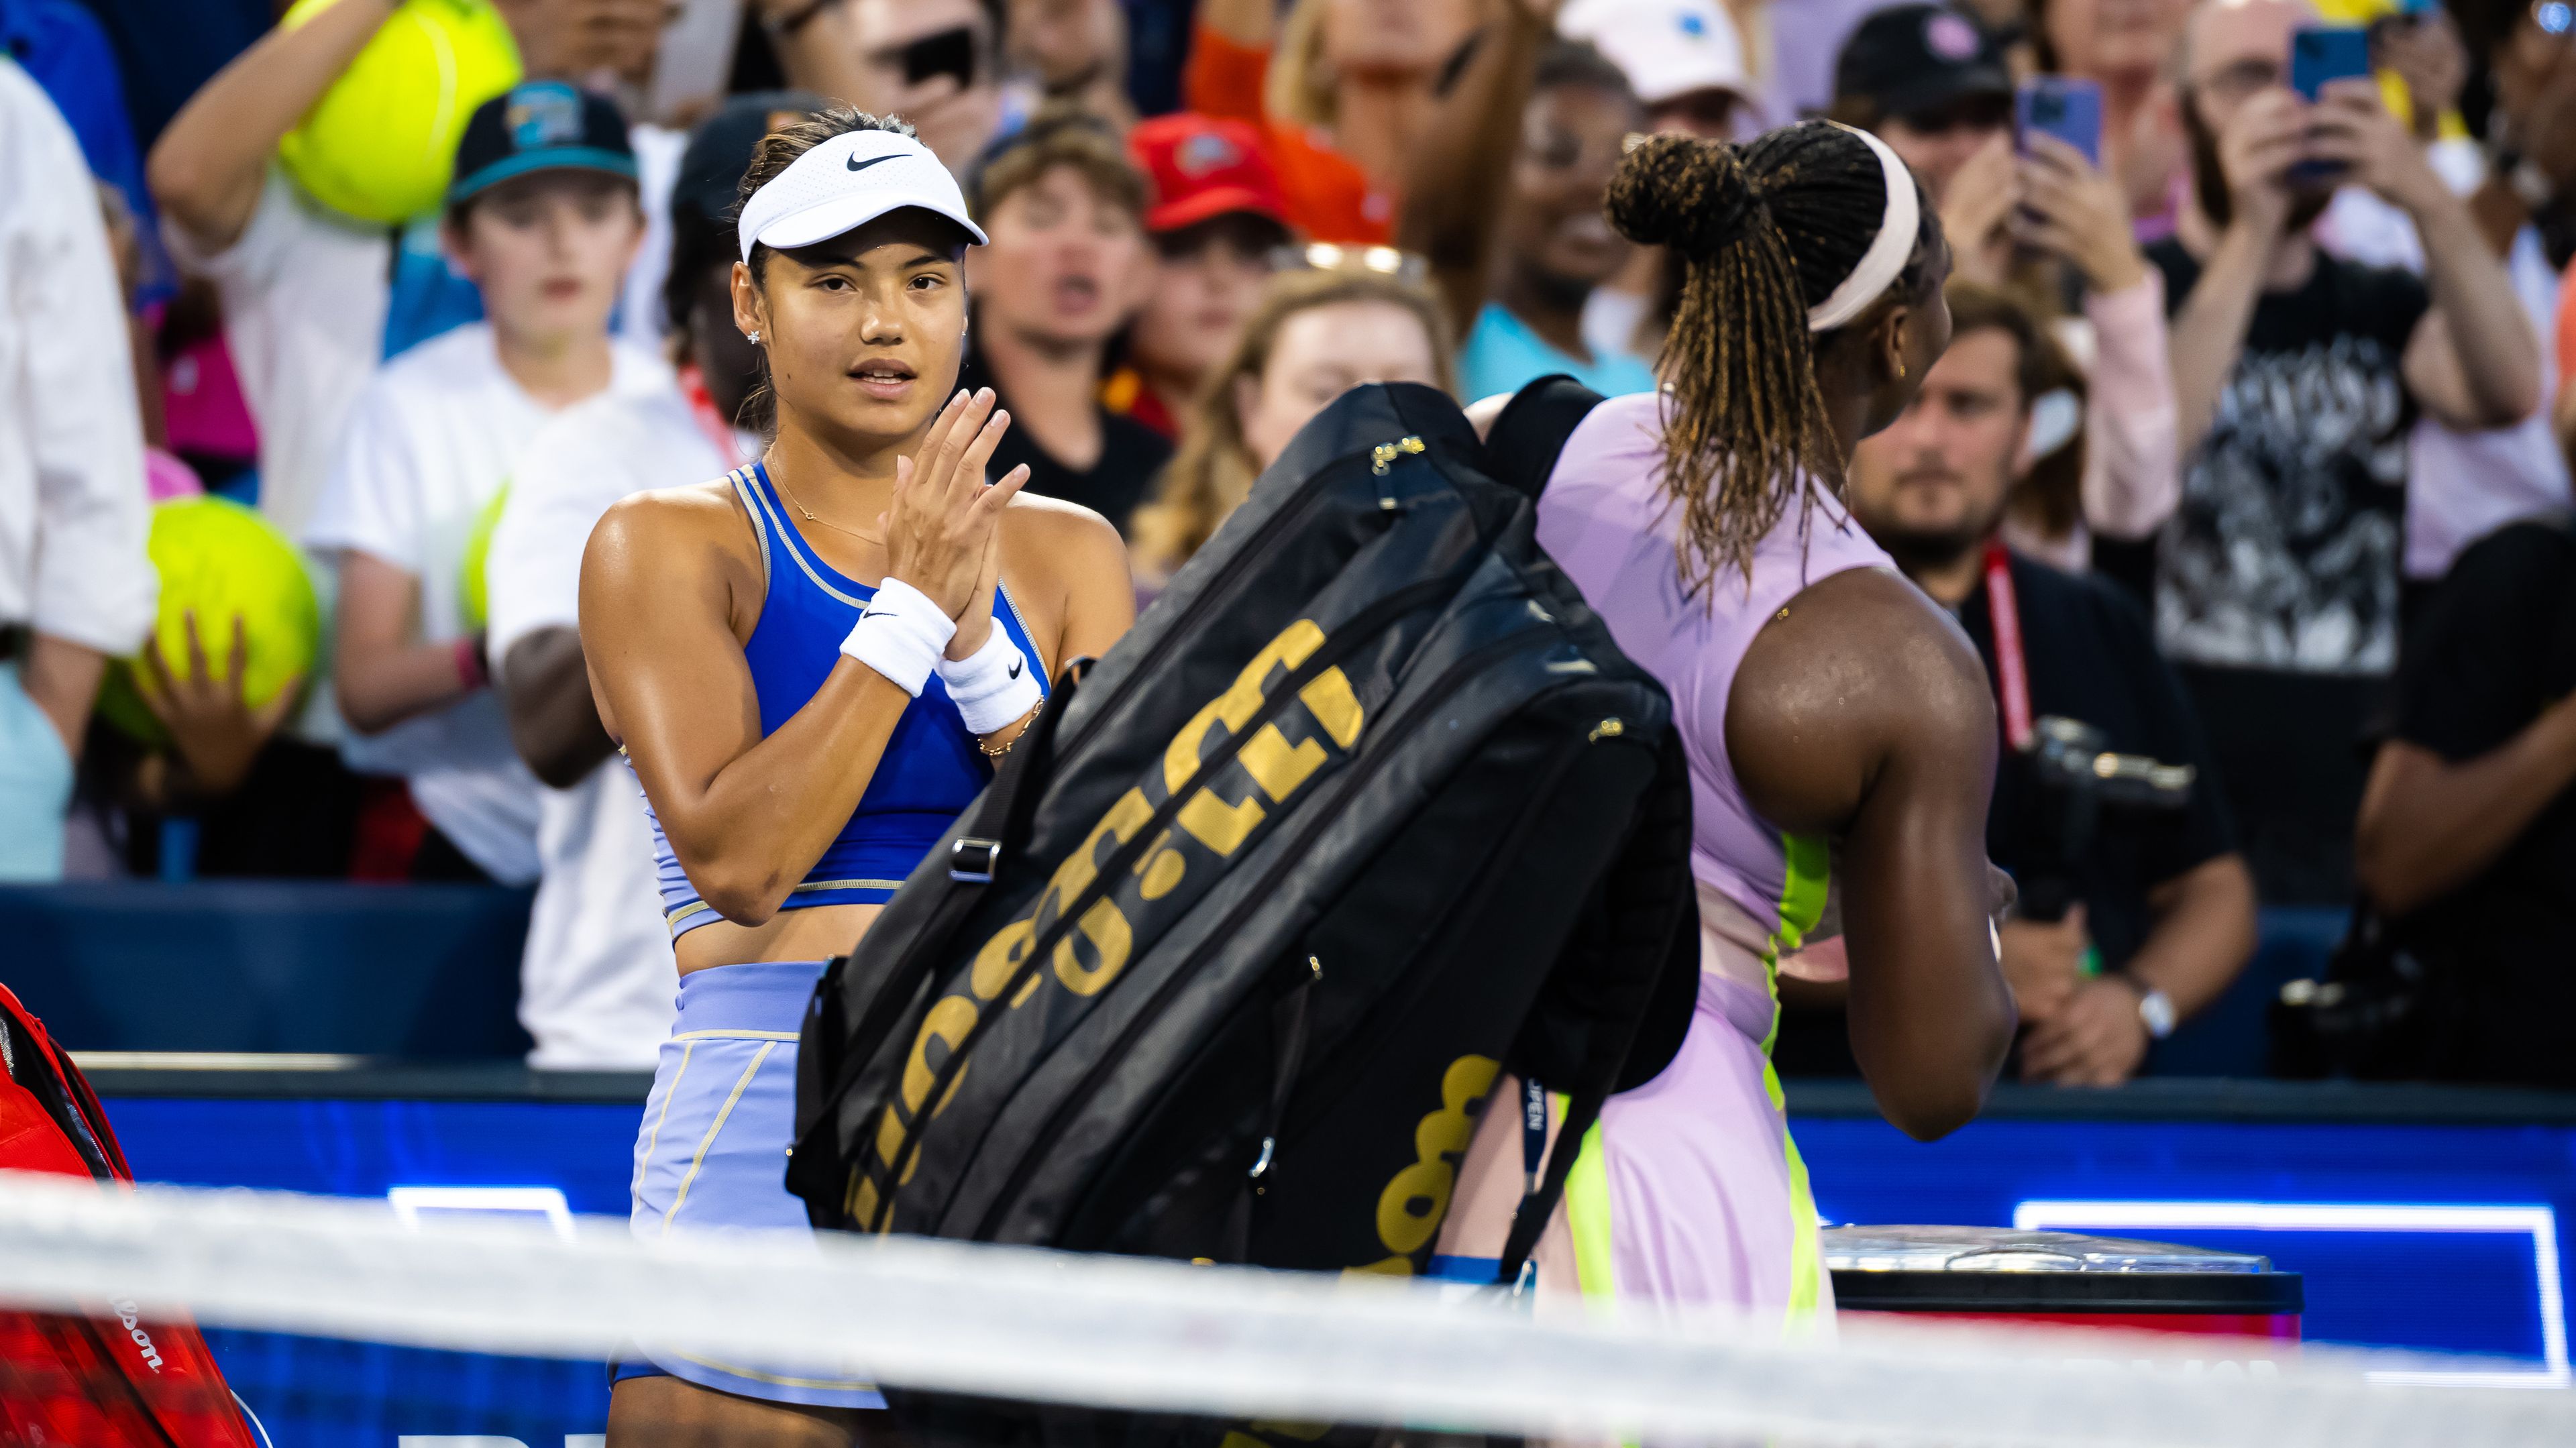 Emma Raducanu applauds Serena Williams as she walks off the court after their match at the Cincinnti Masters. Photo: Robert Prange